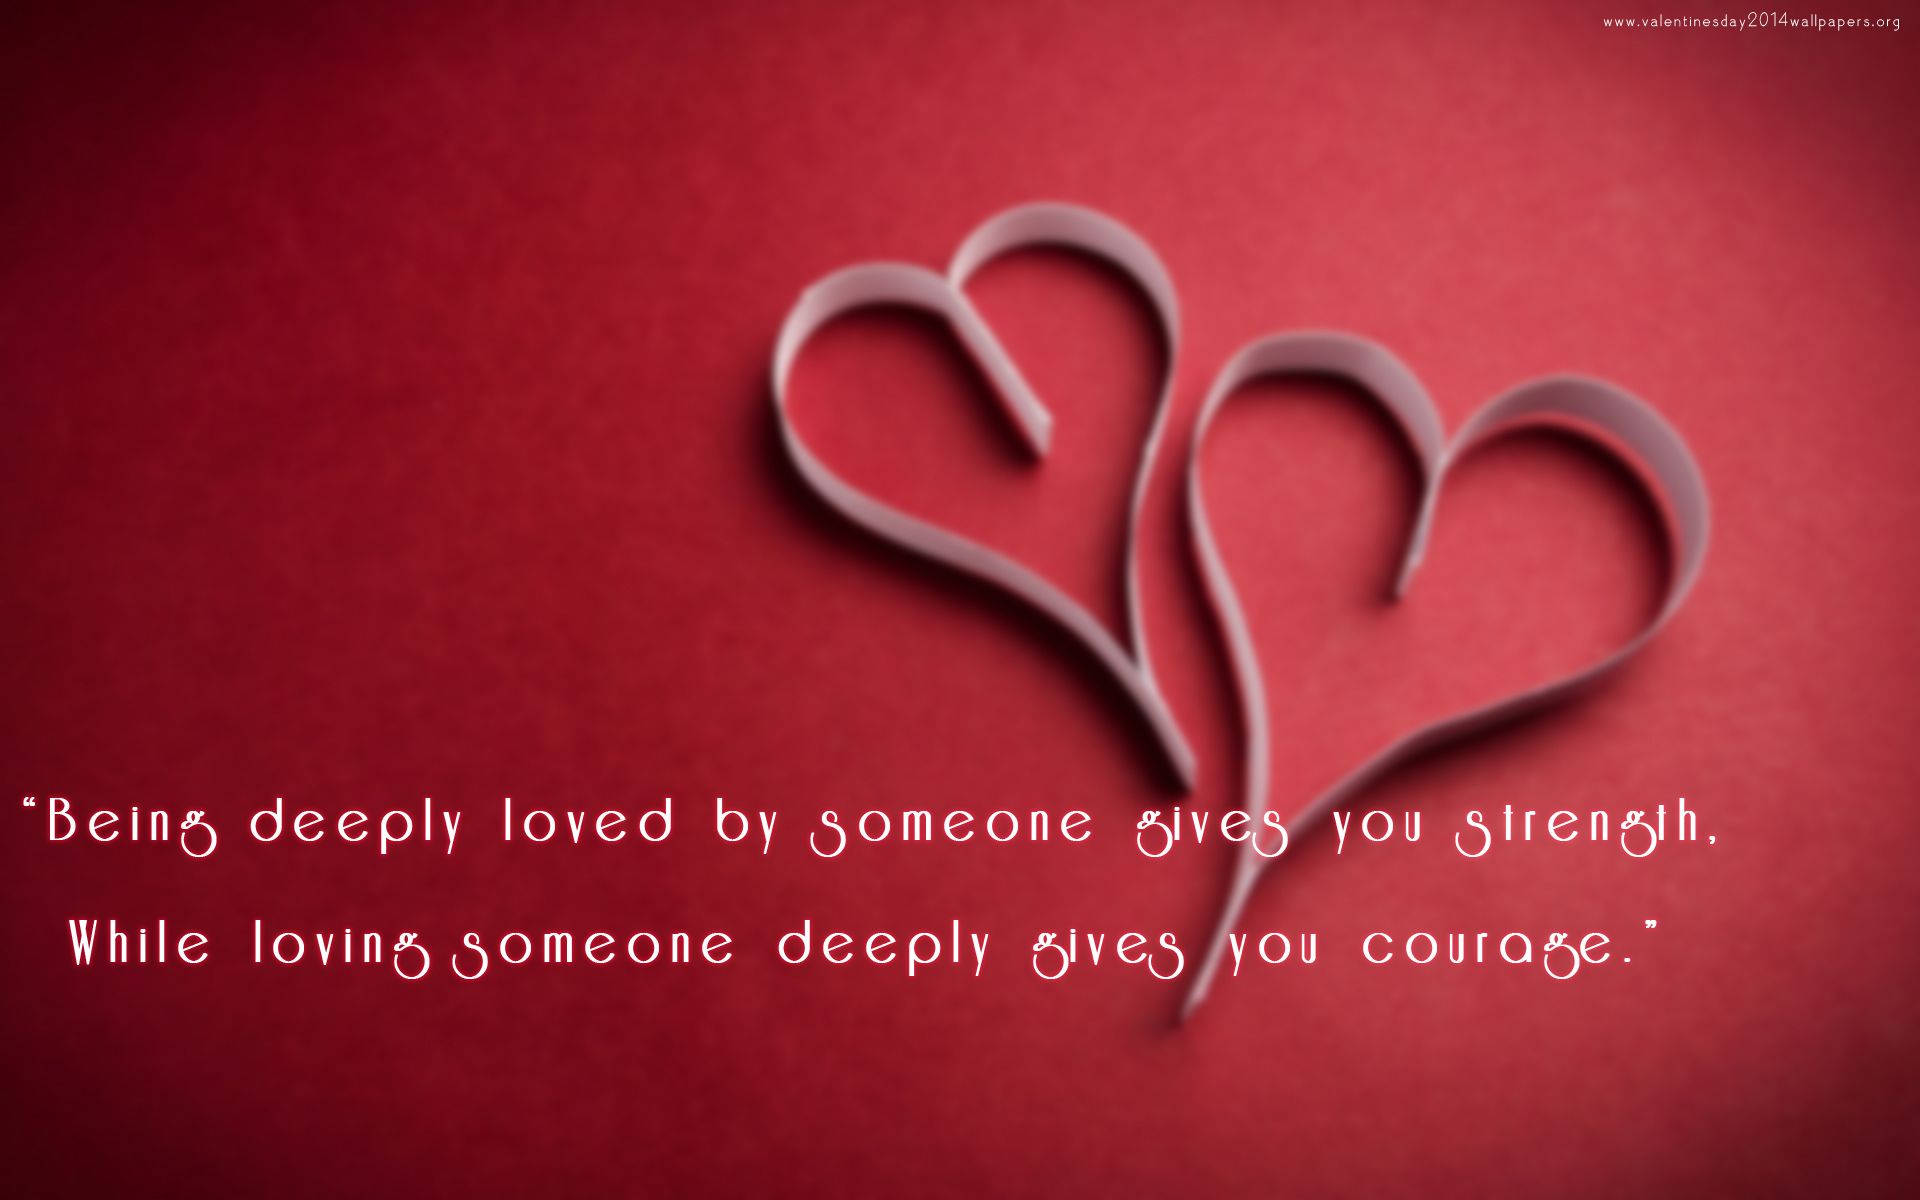 Download Happy valentines day 2014 wallpapers Full HD For Free